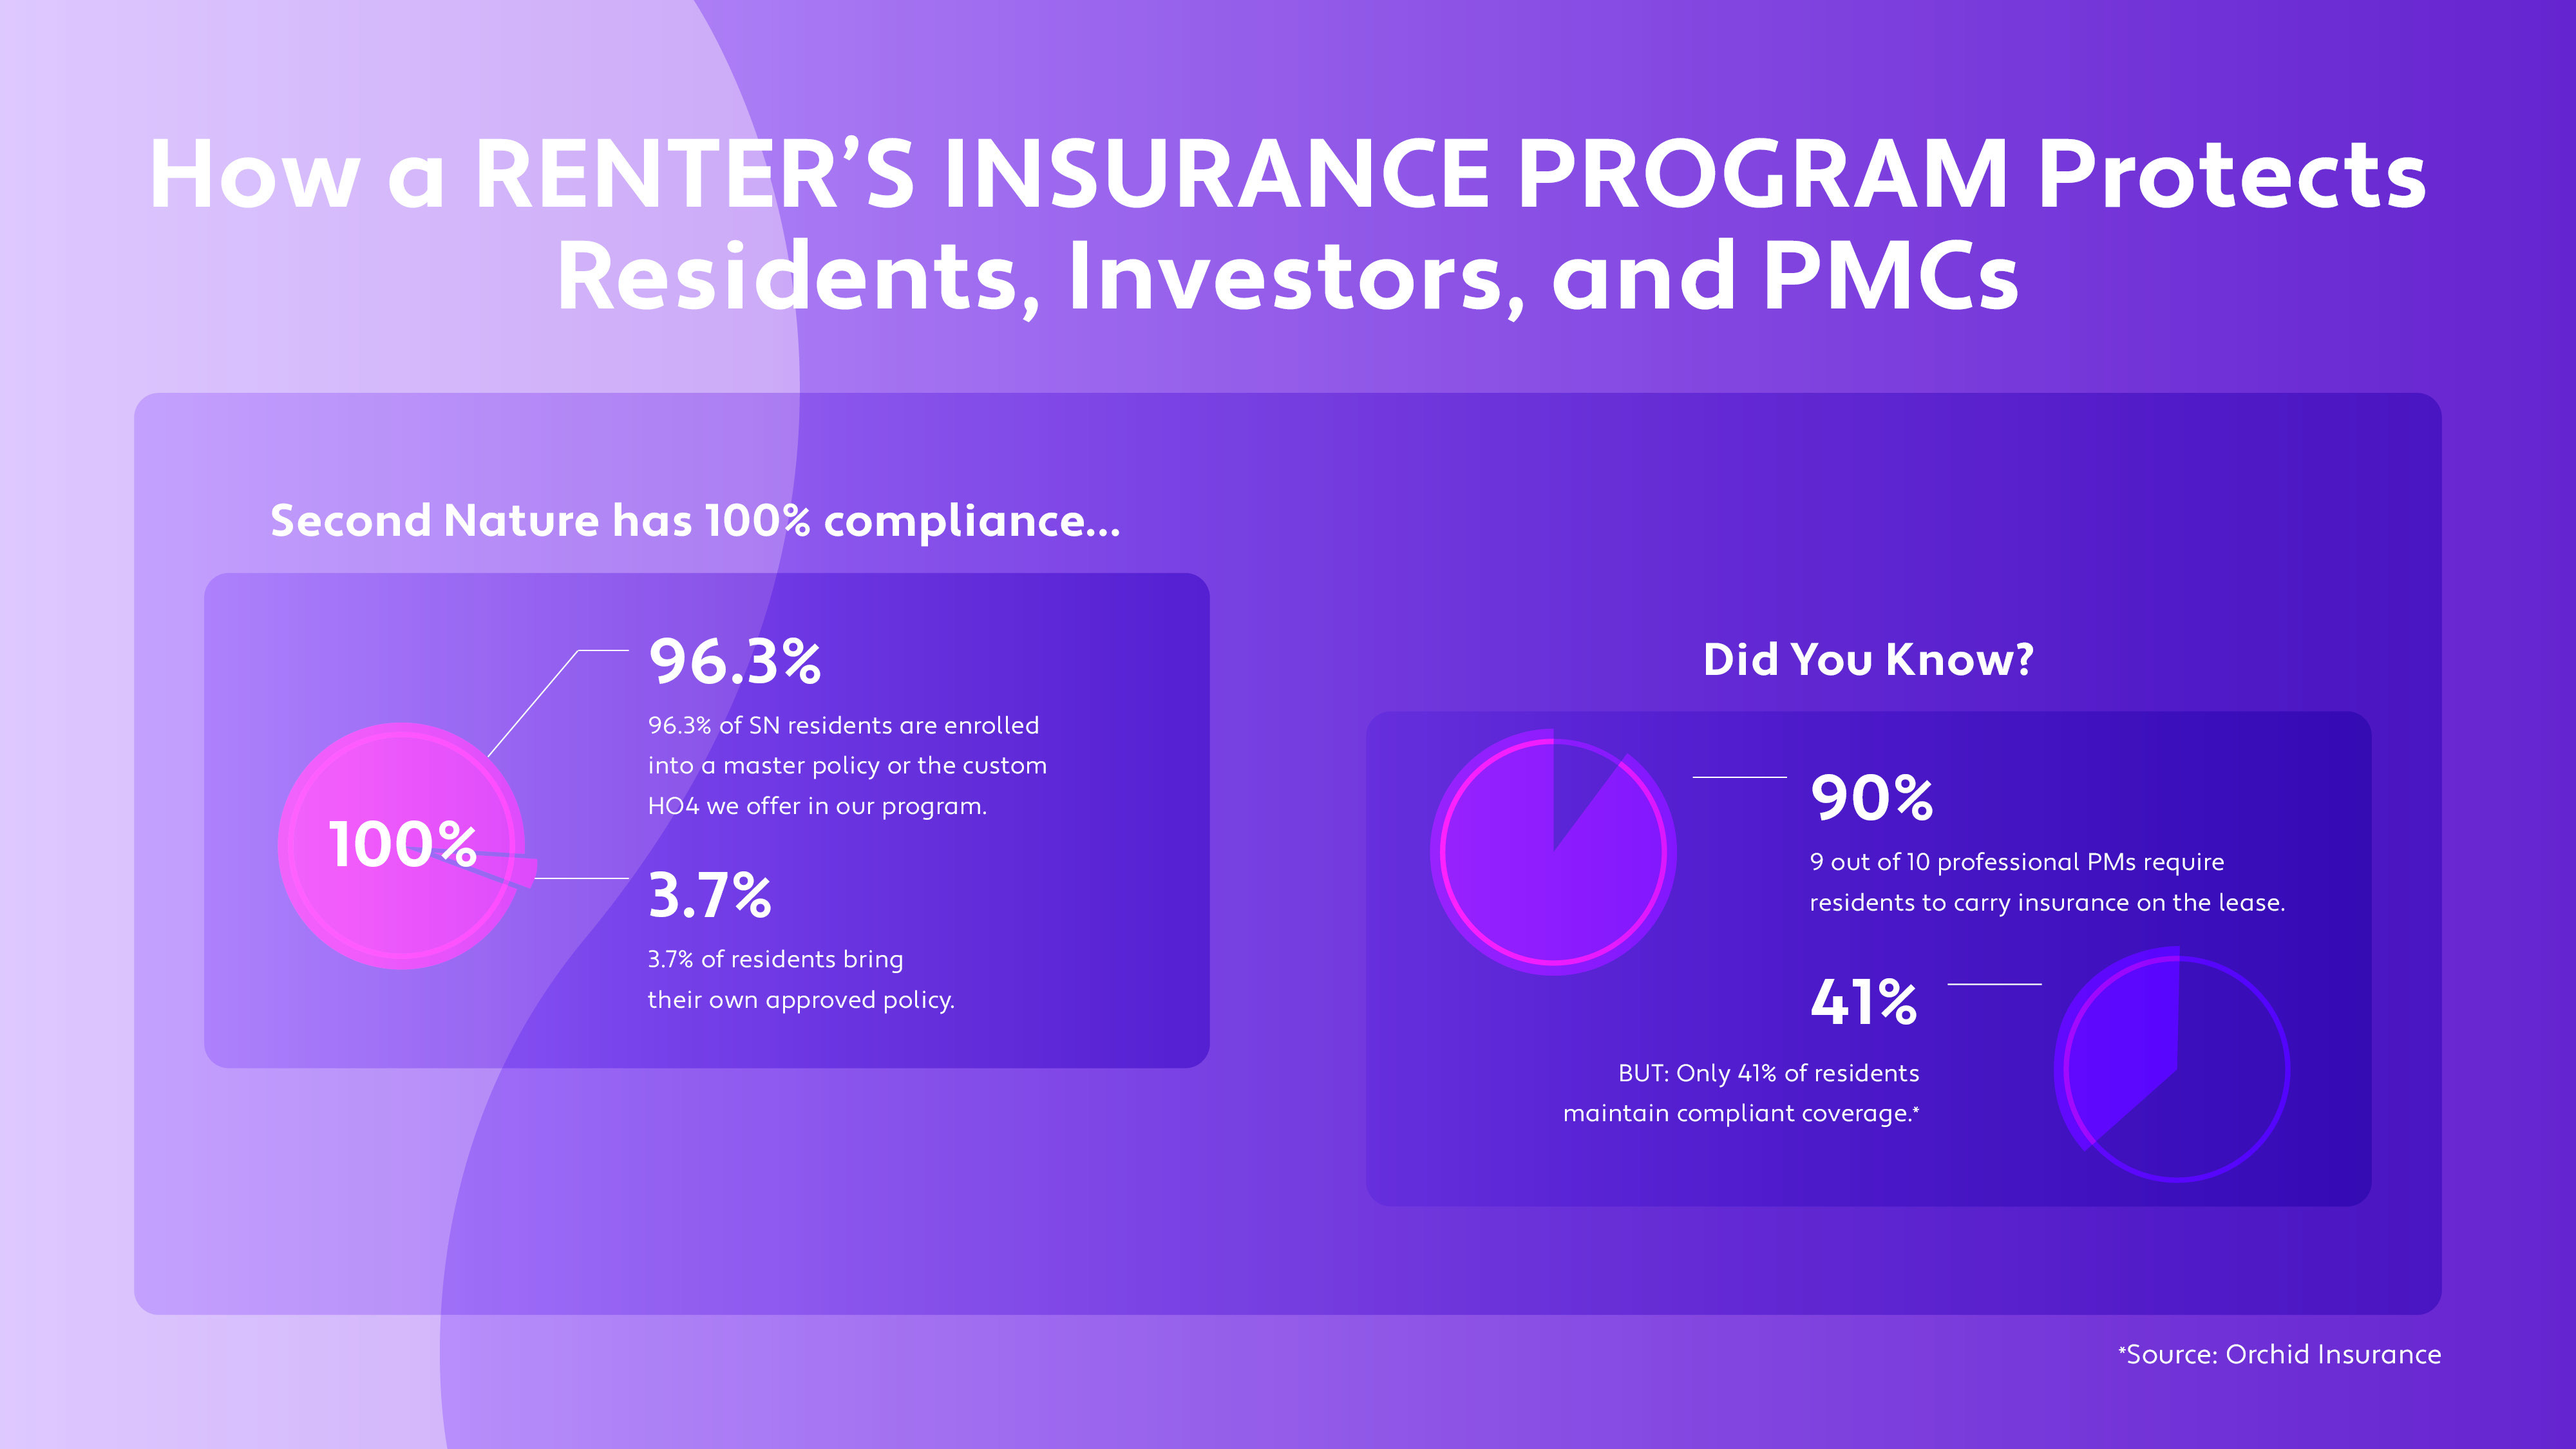 Hows a Renters Insurance Program Proteccts-RBP White Page-CHARTS